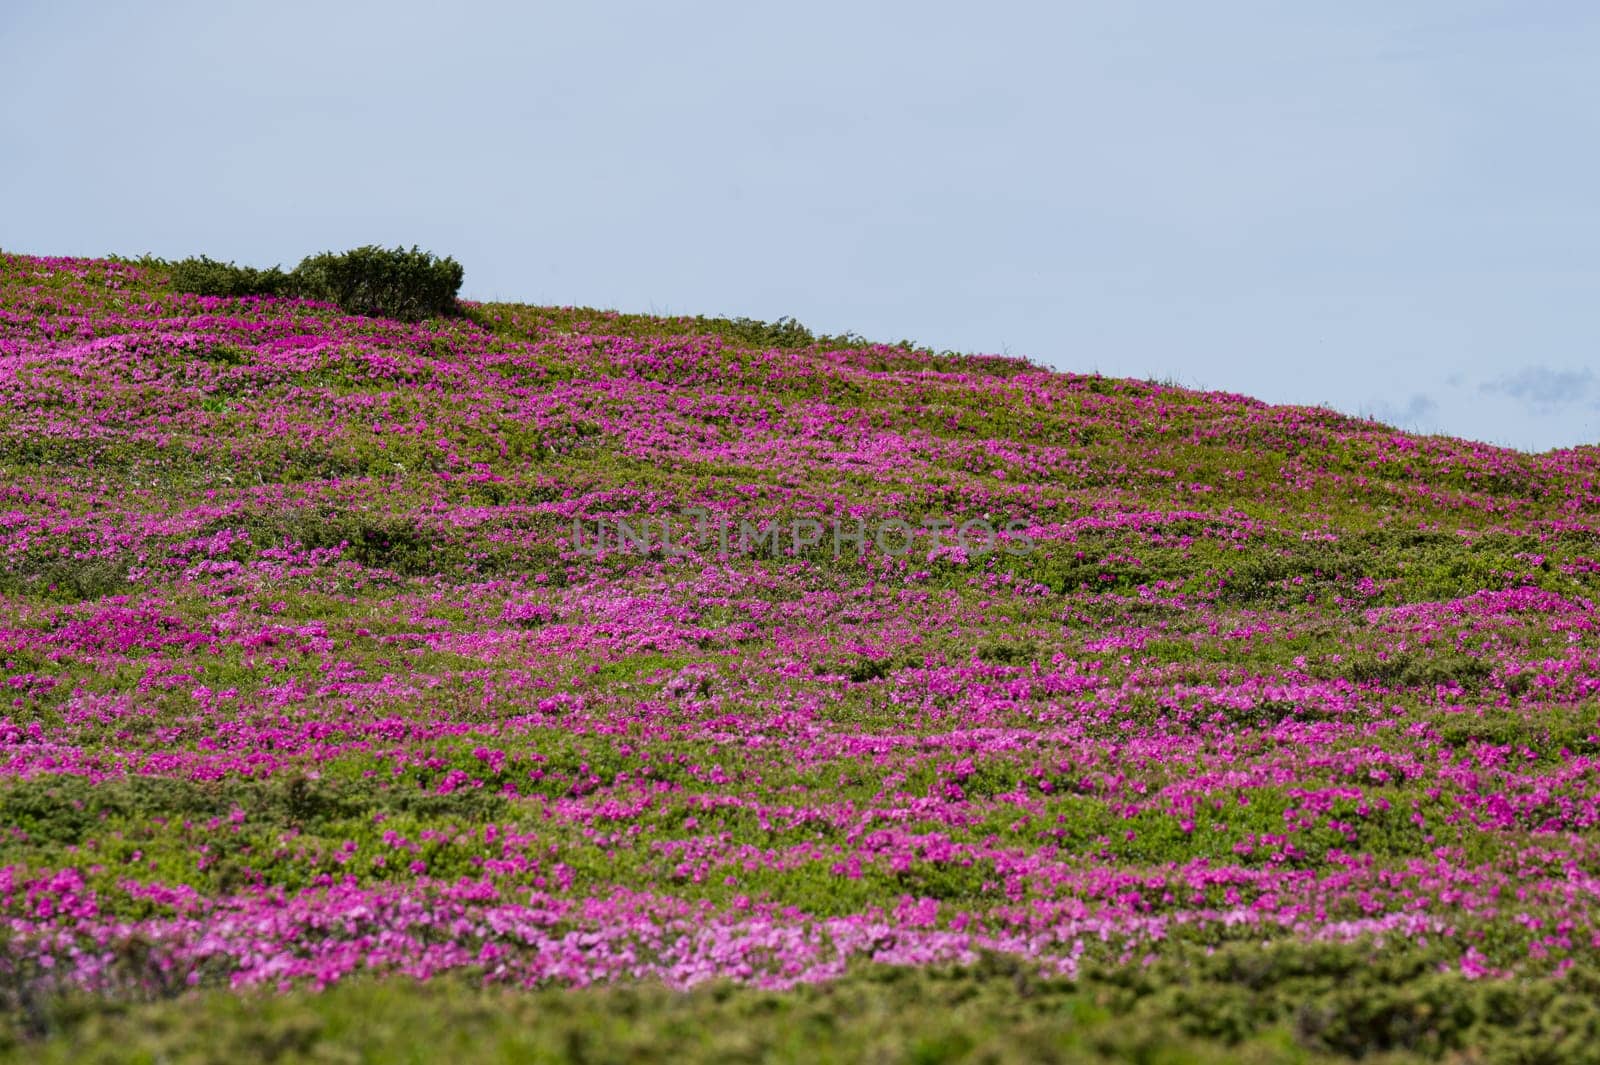 A meadow in the mountains with rhododendron flowers, the blooming season of rhododendrons in the mountains.